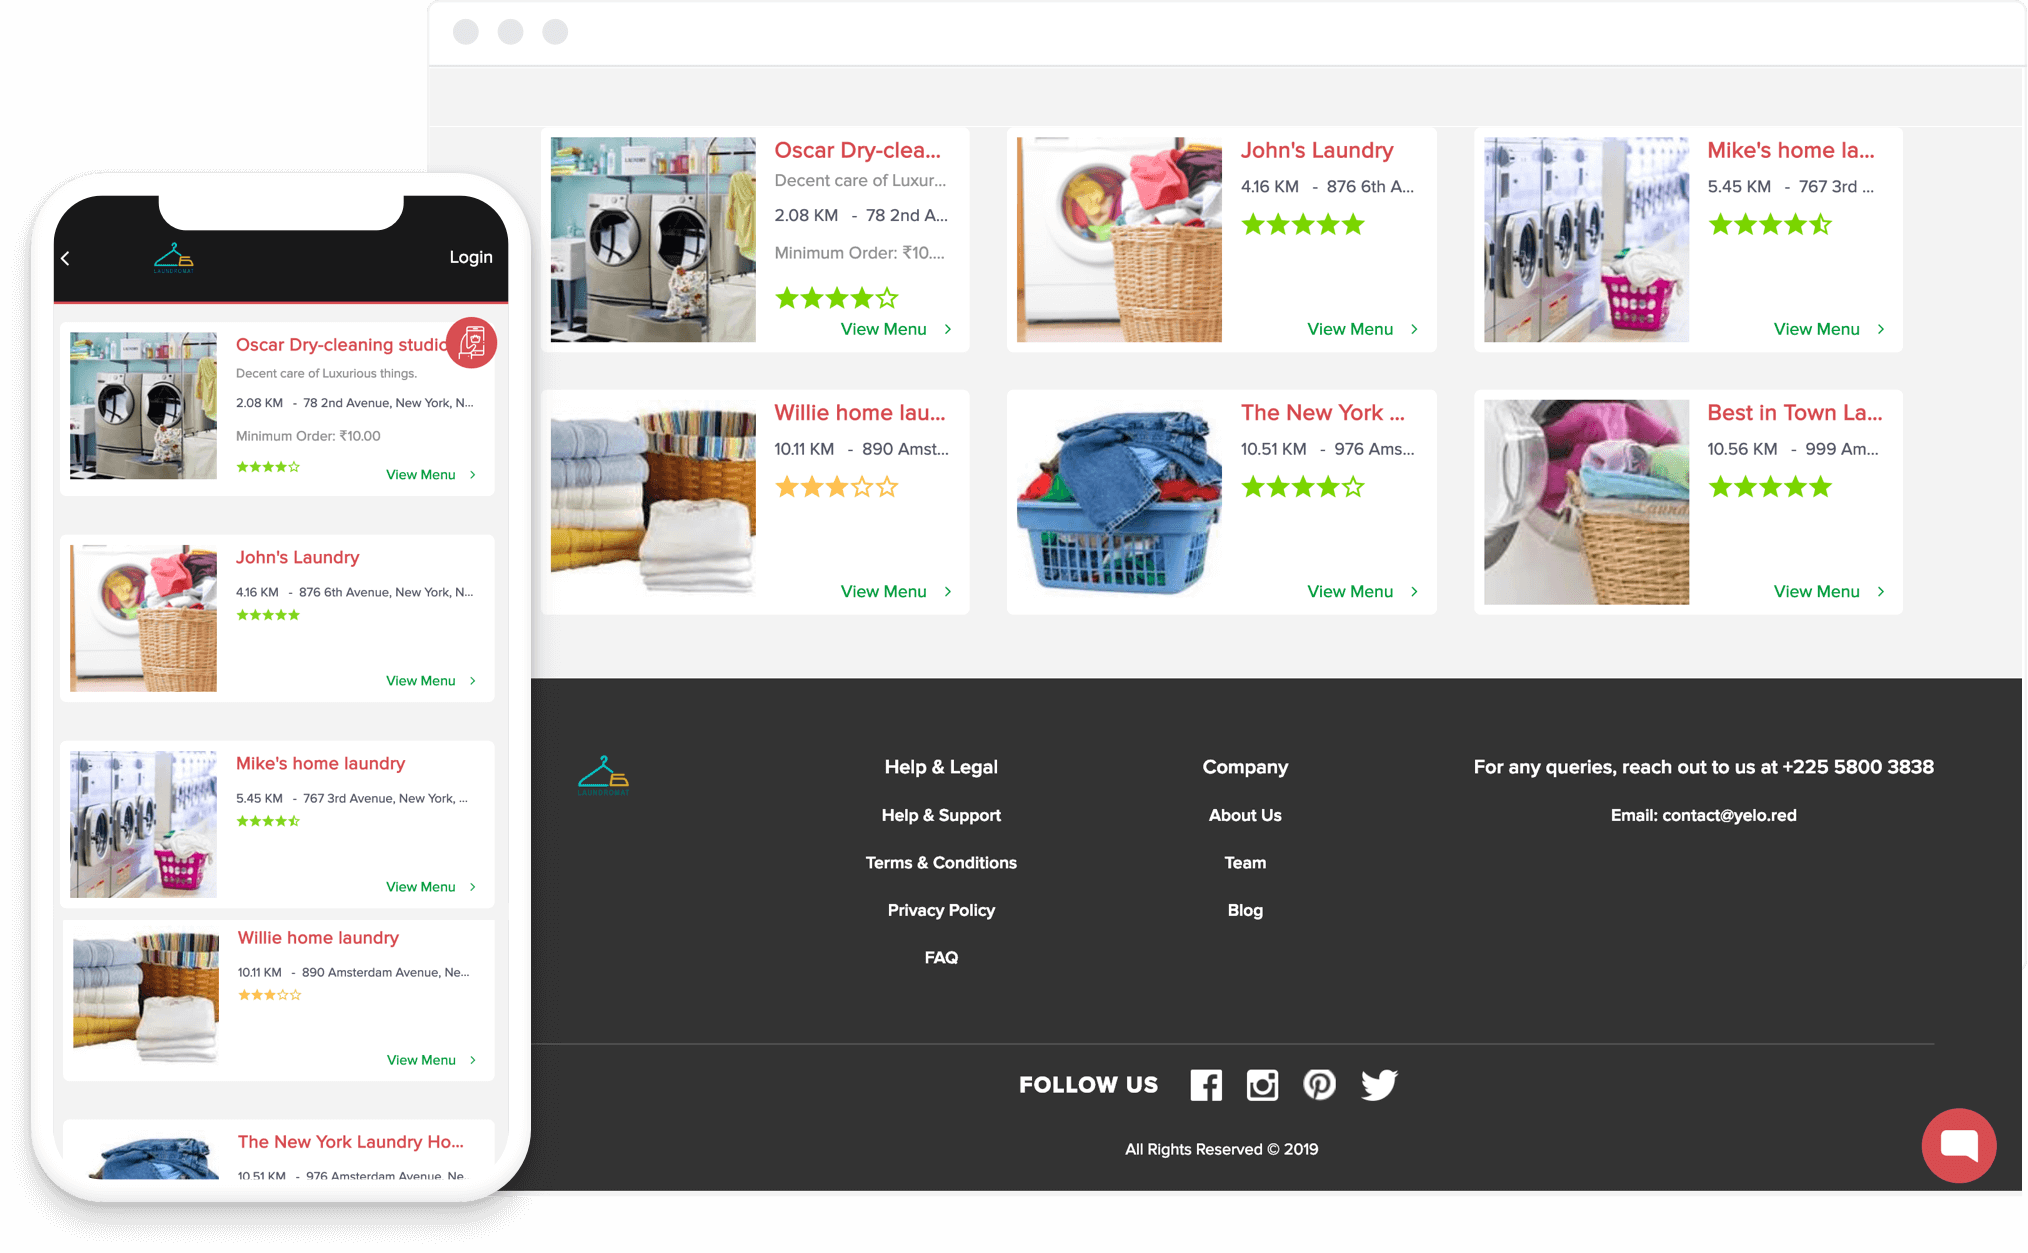 Marketplace Software